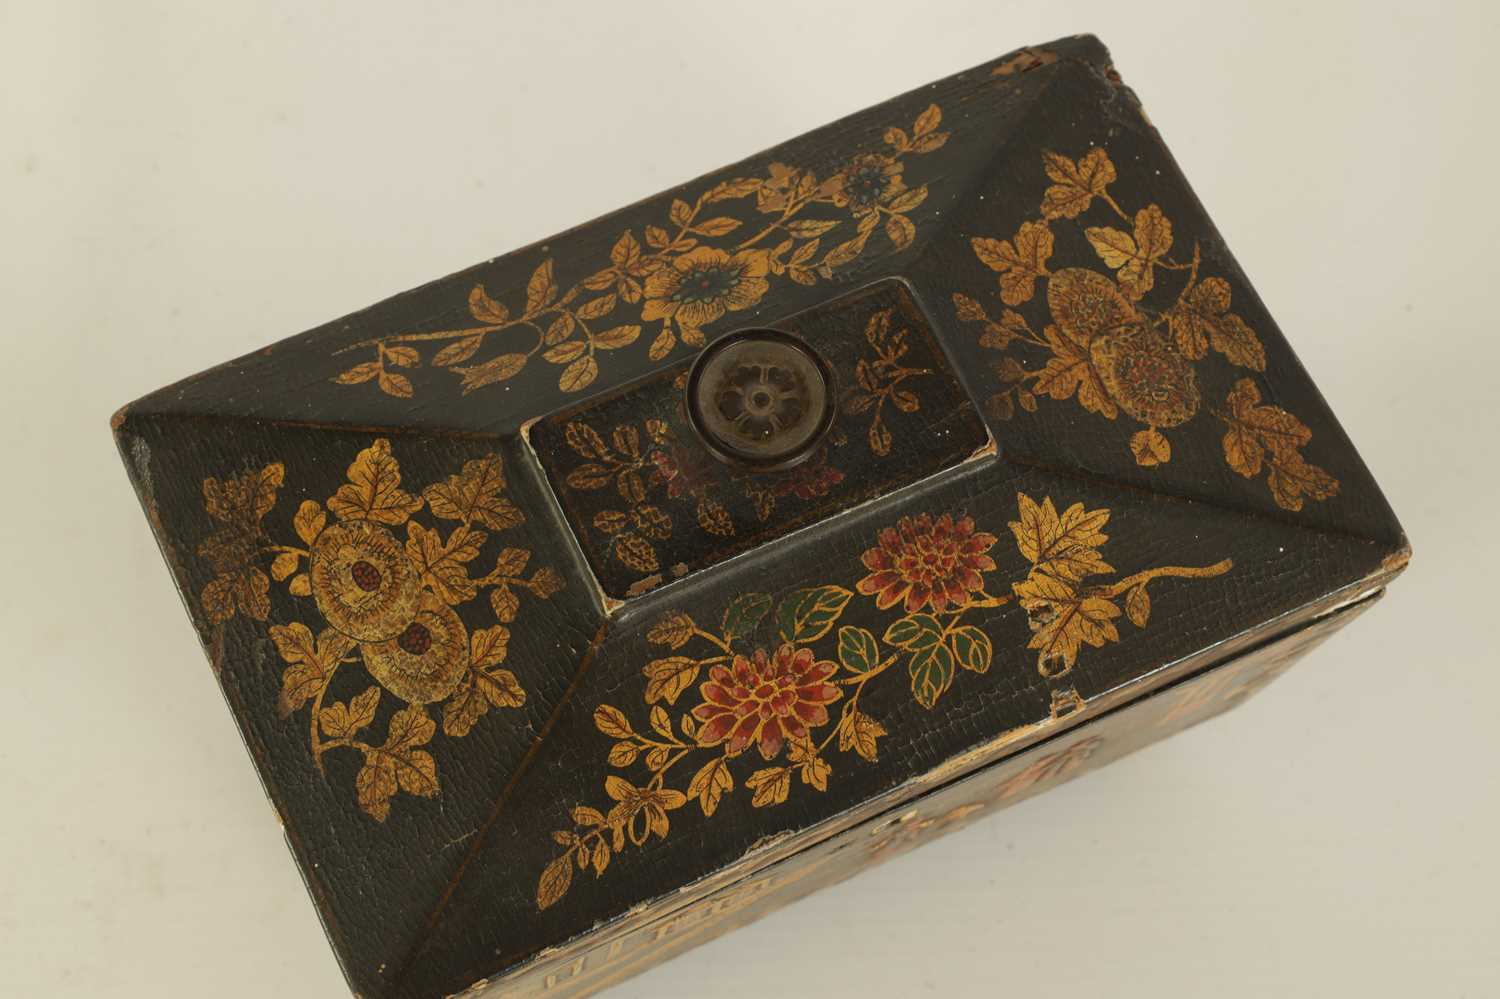 A LATE GEORGIAN CHINOISERIE DECORATED BLACK LACQUER SARCOPHAGUS TEA CADDY - Image 2 of 8